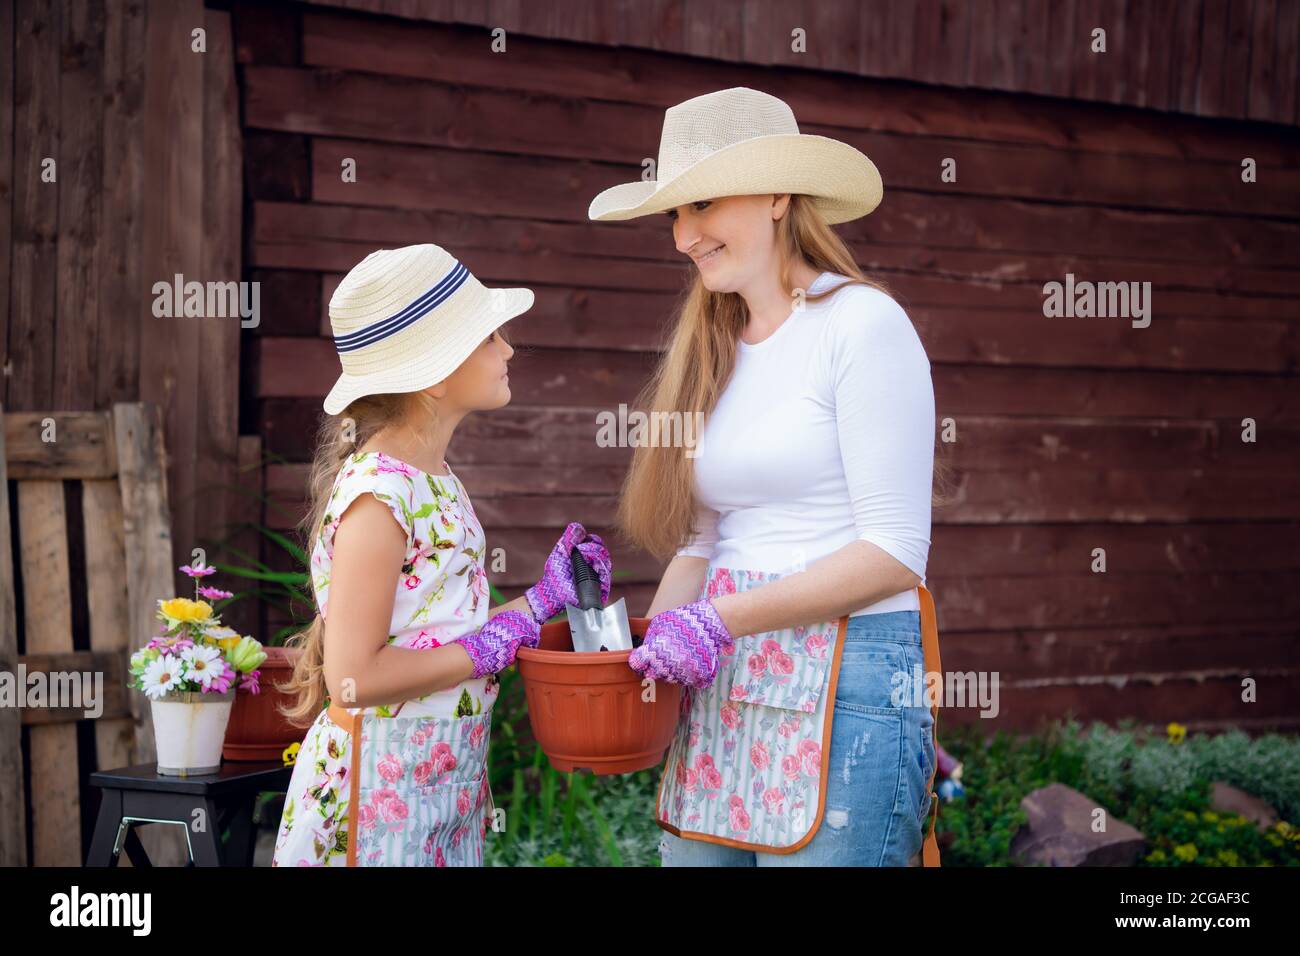 Woman And Girl Mother And Daughter Gardening Together Planting Flowers In The Garden Stock 